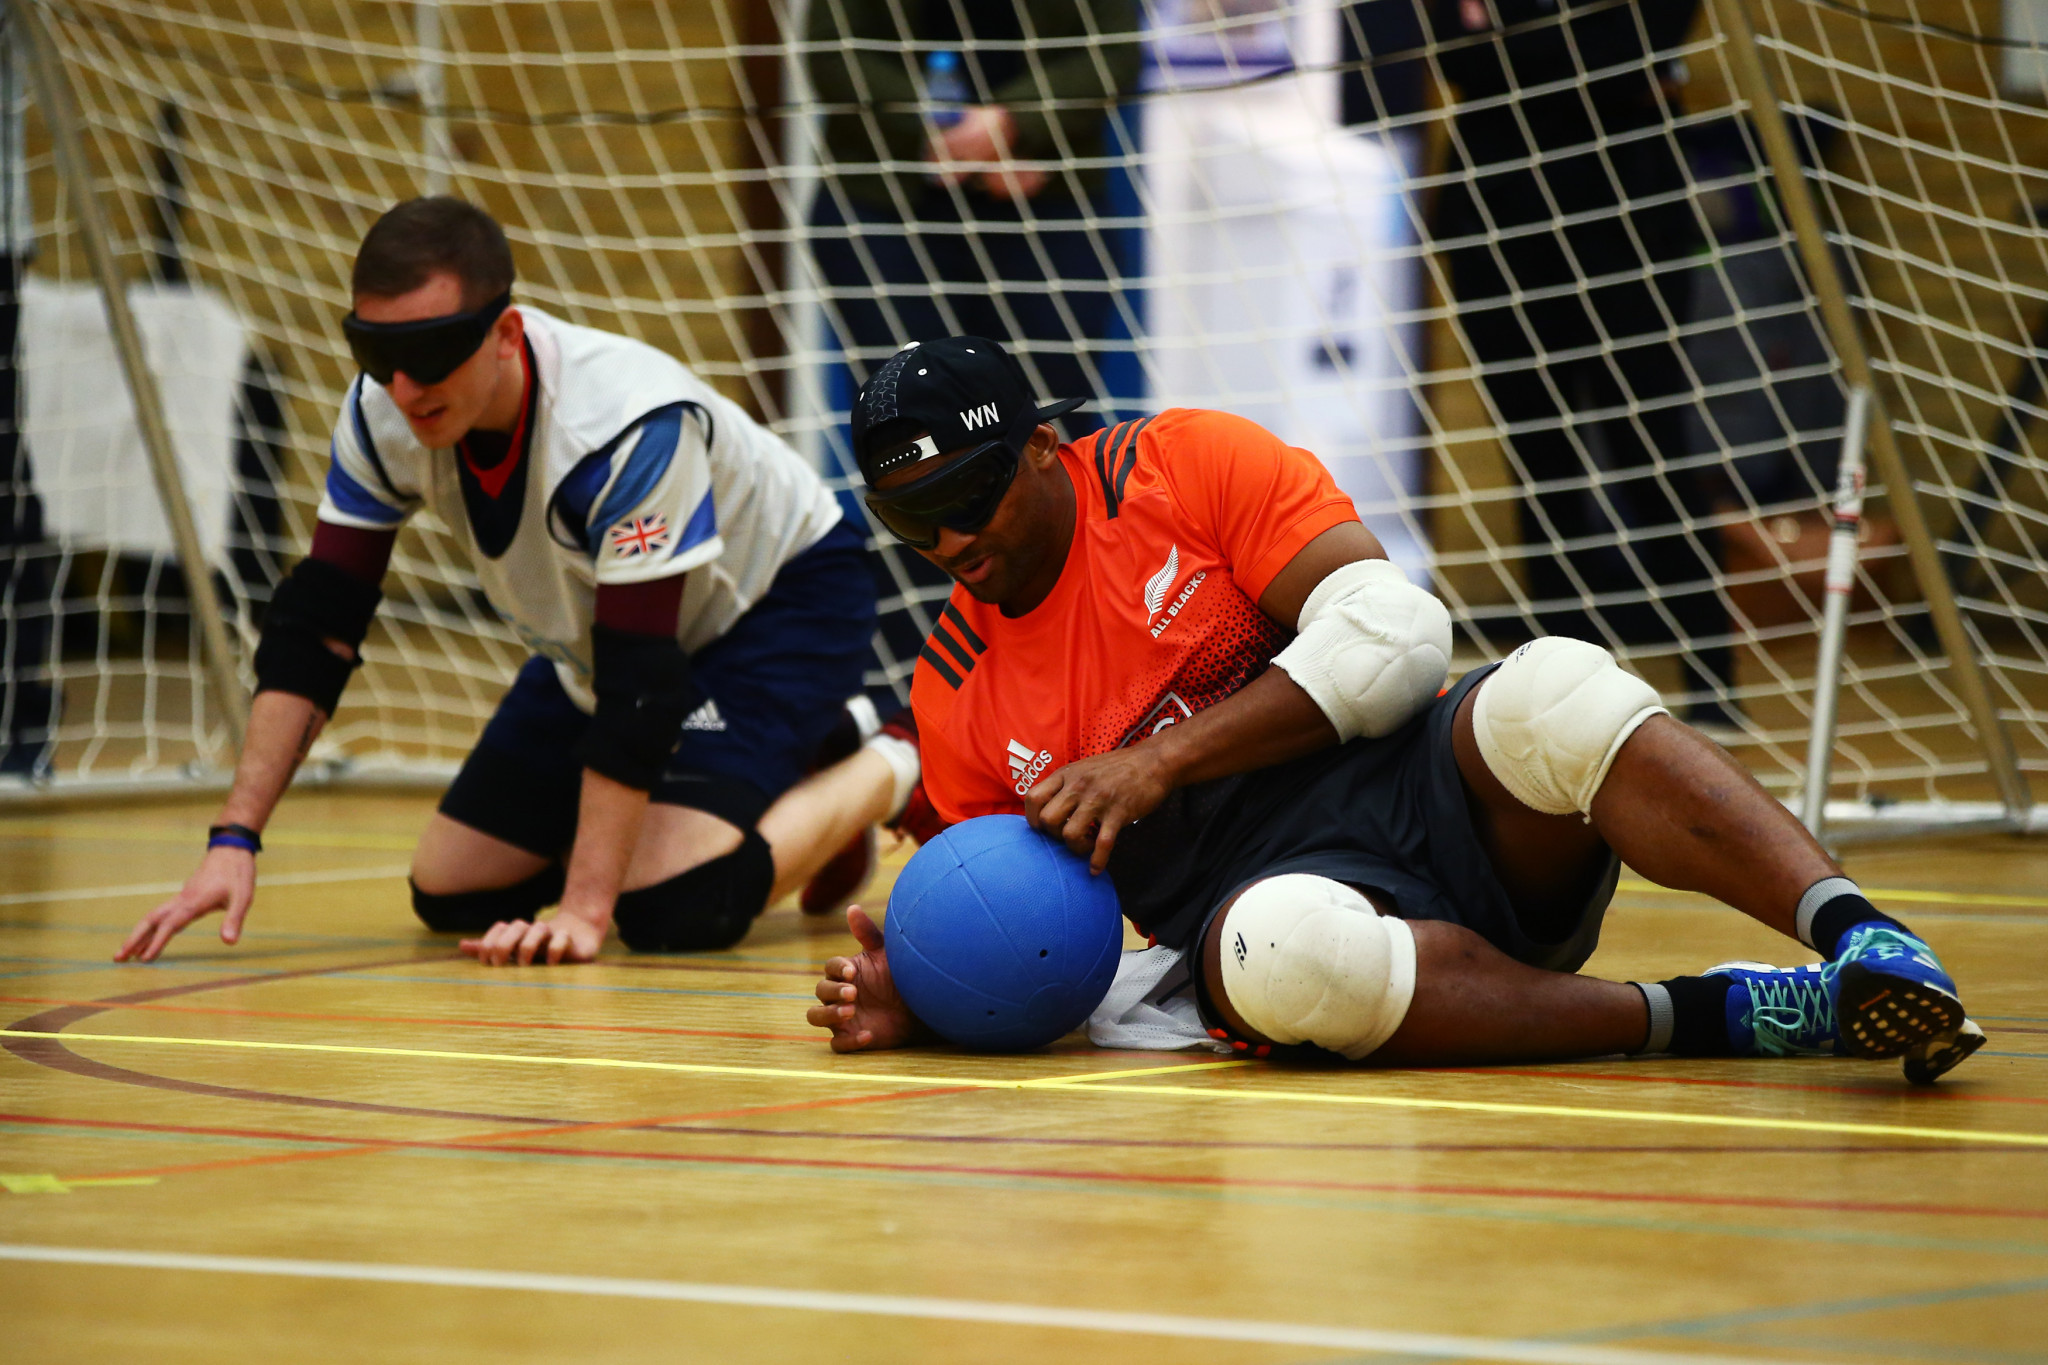 The IBSA Goalball European Championships are due to begin in Poland, a sport played by blind and visually impaired players ©Getty Images